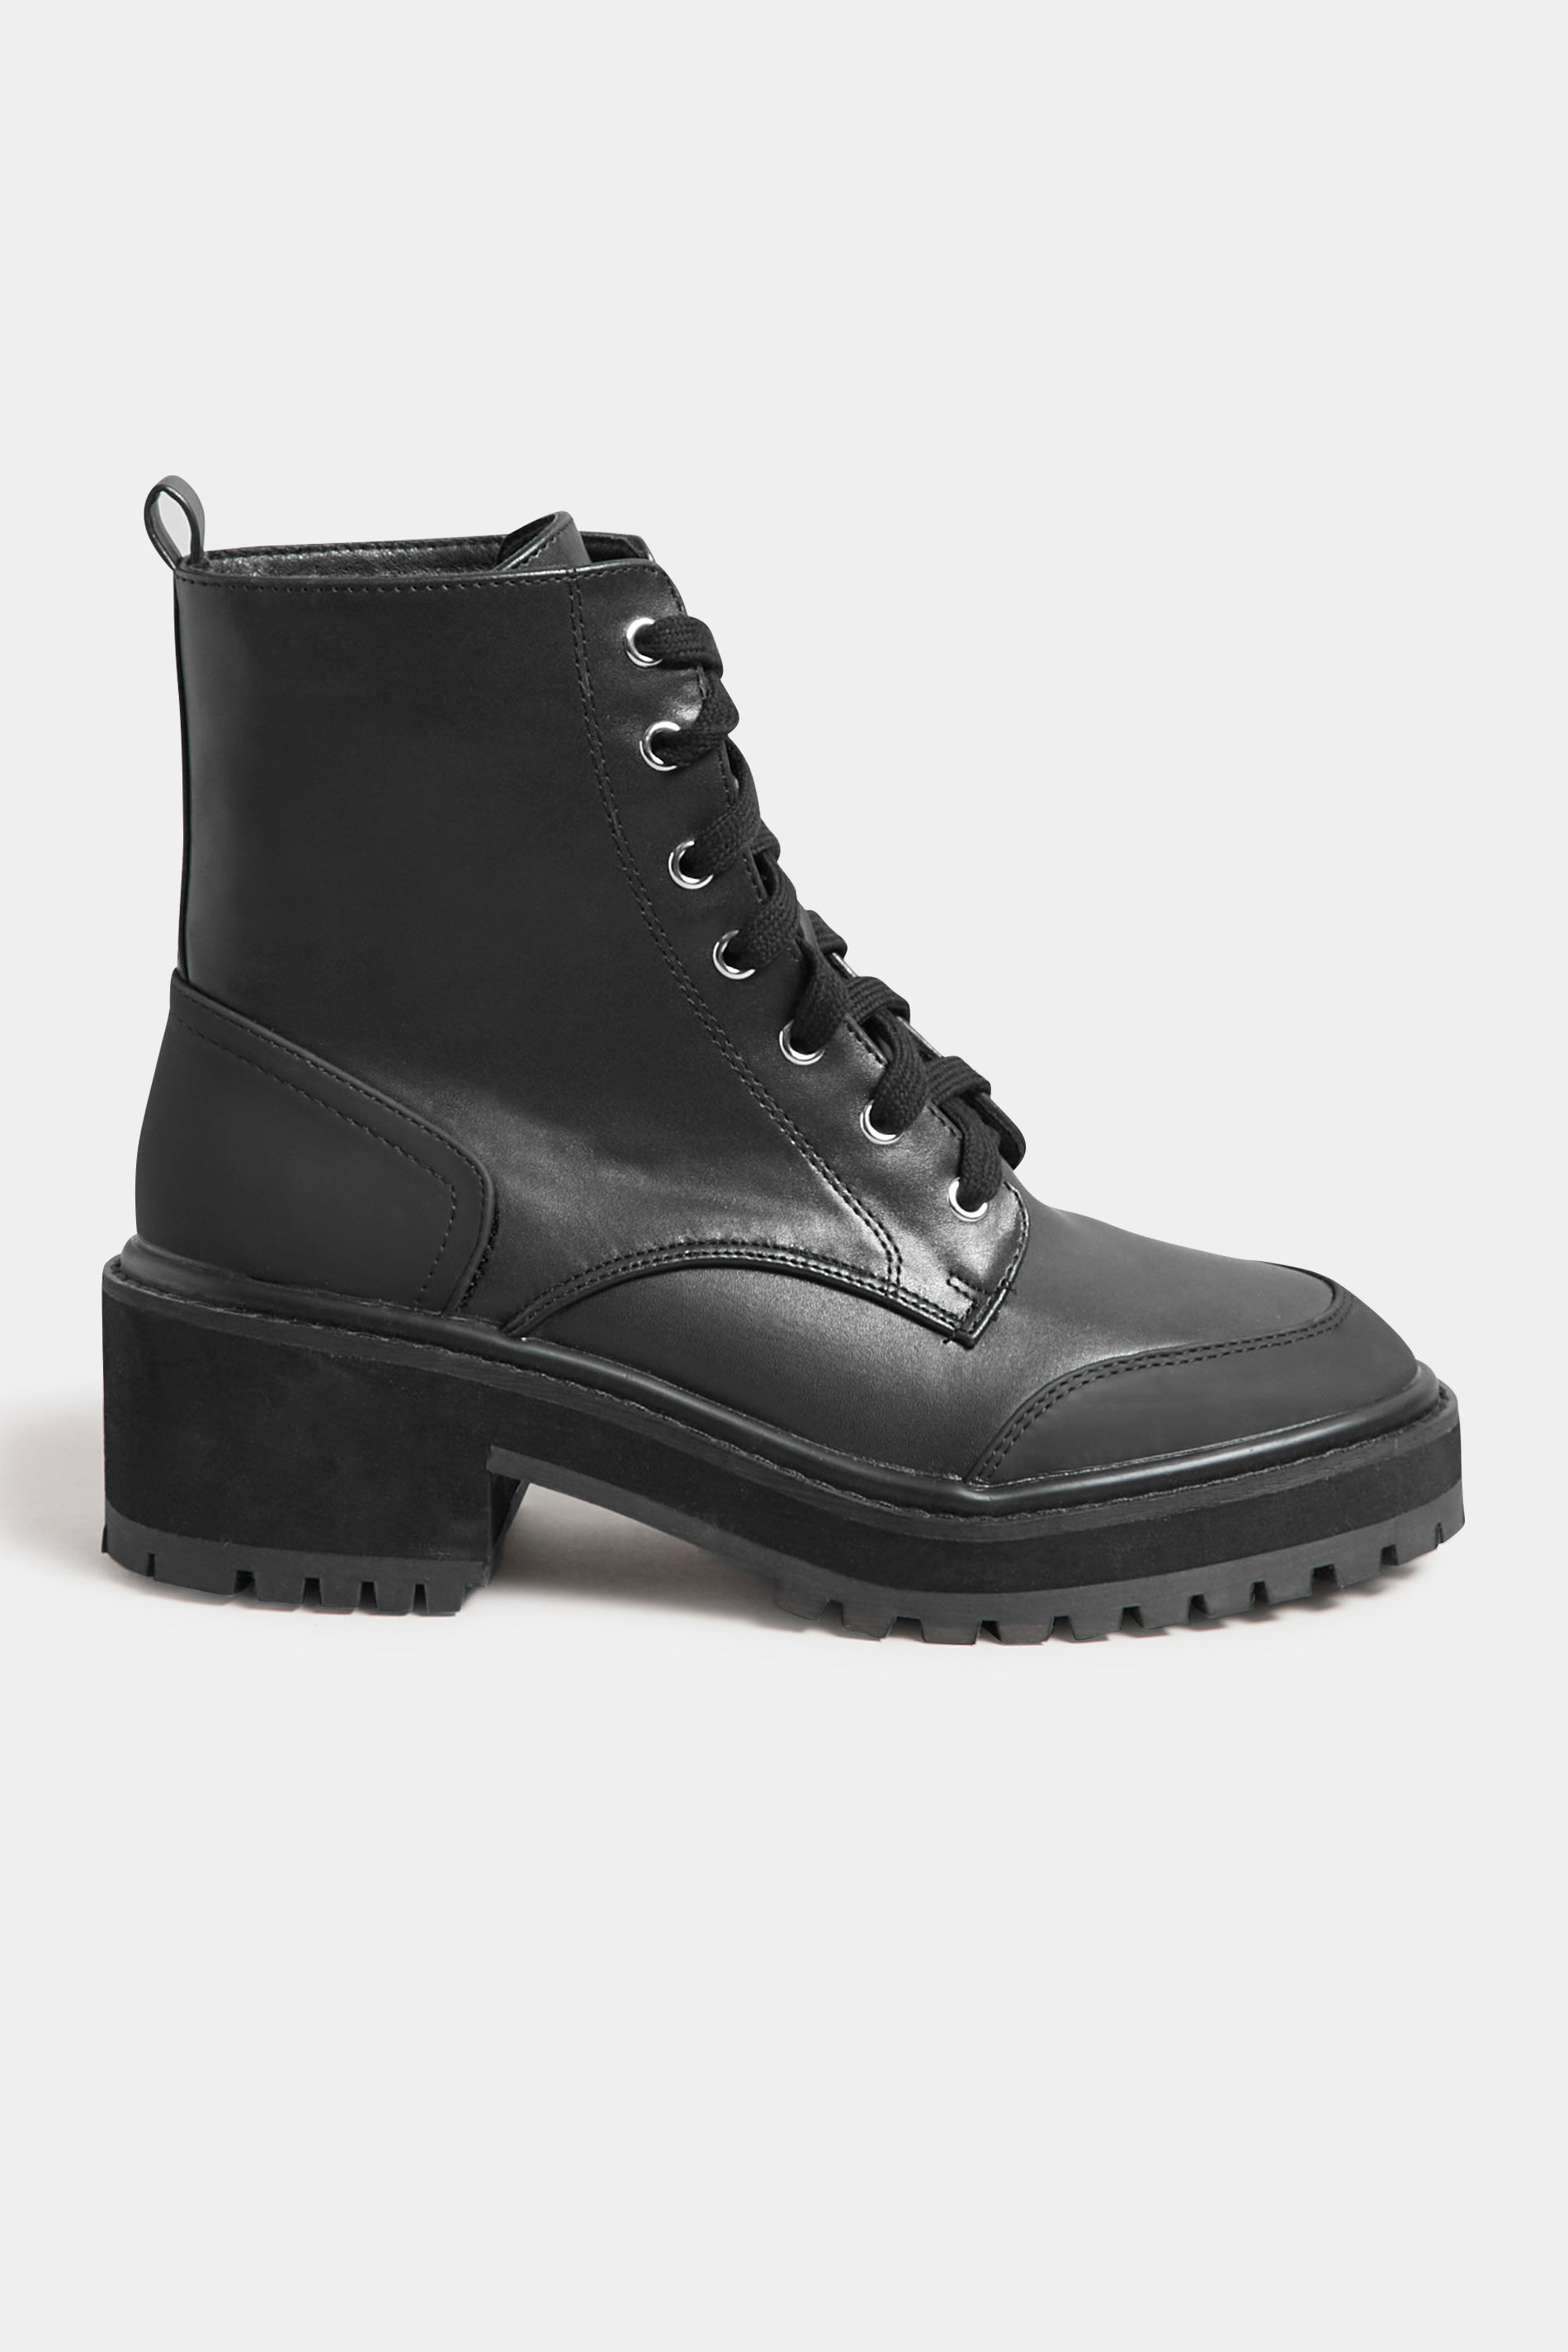 LTS Black Chunky Ankle Boots In Standard Fit | Long Tall Sally